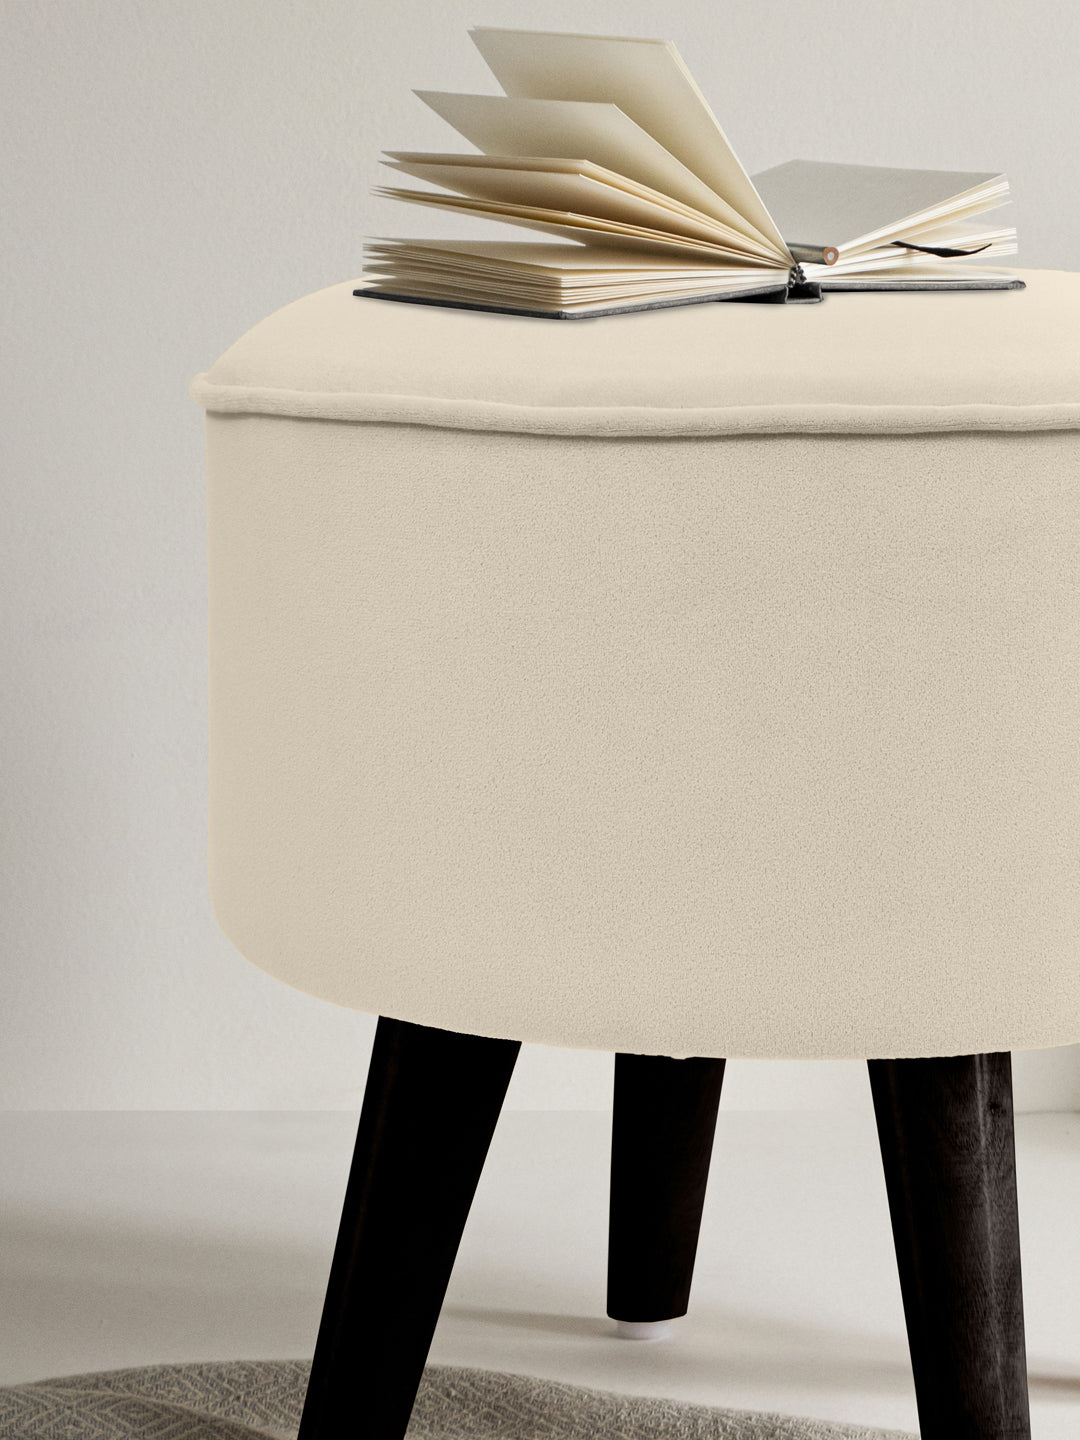 Ivory White Ottoman With Wooden Legs